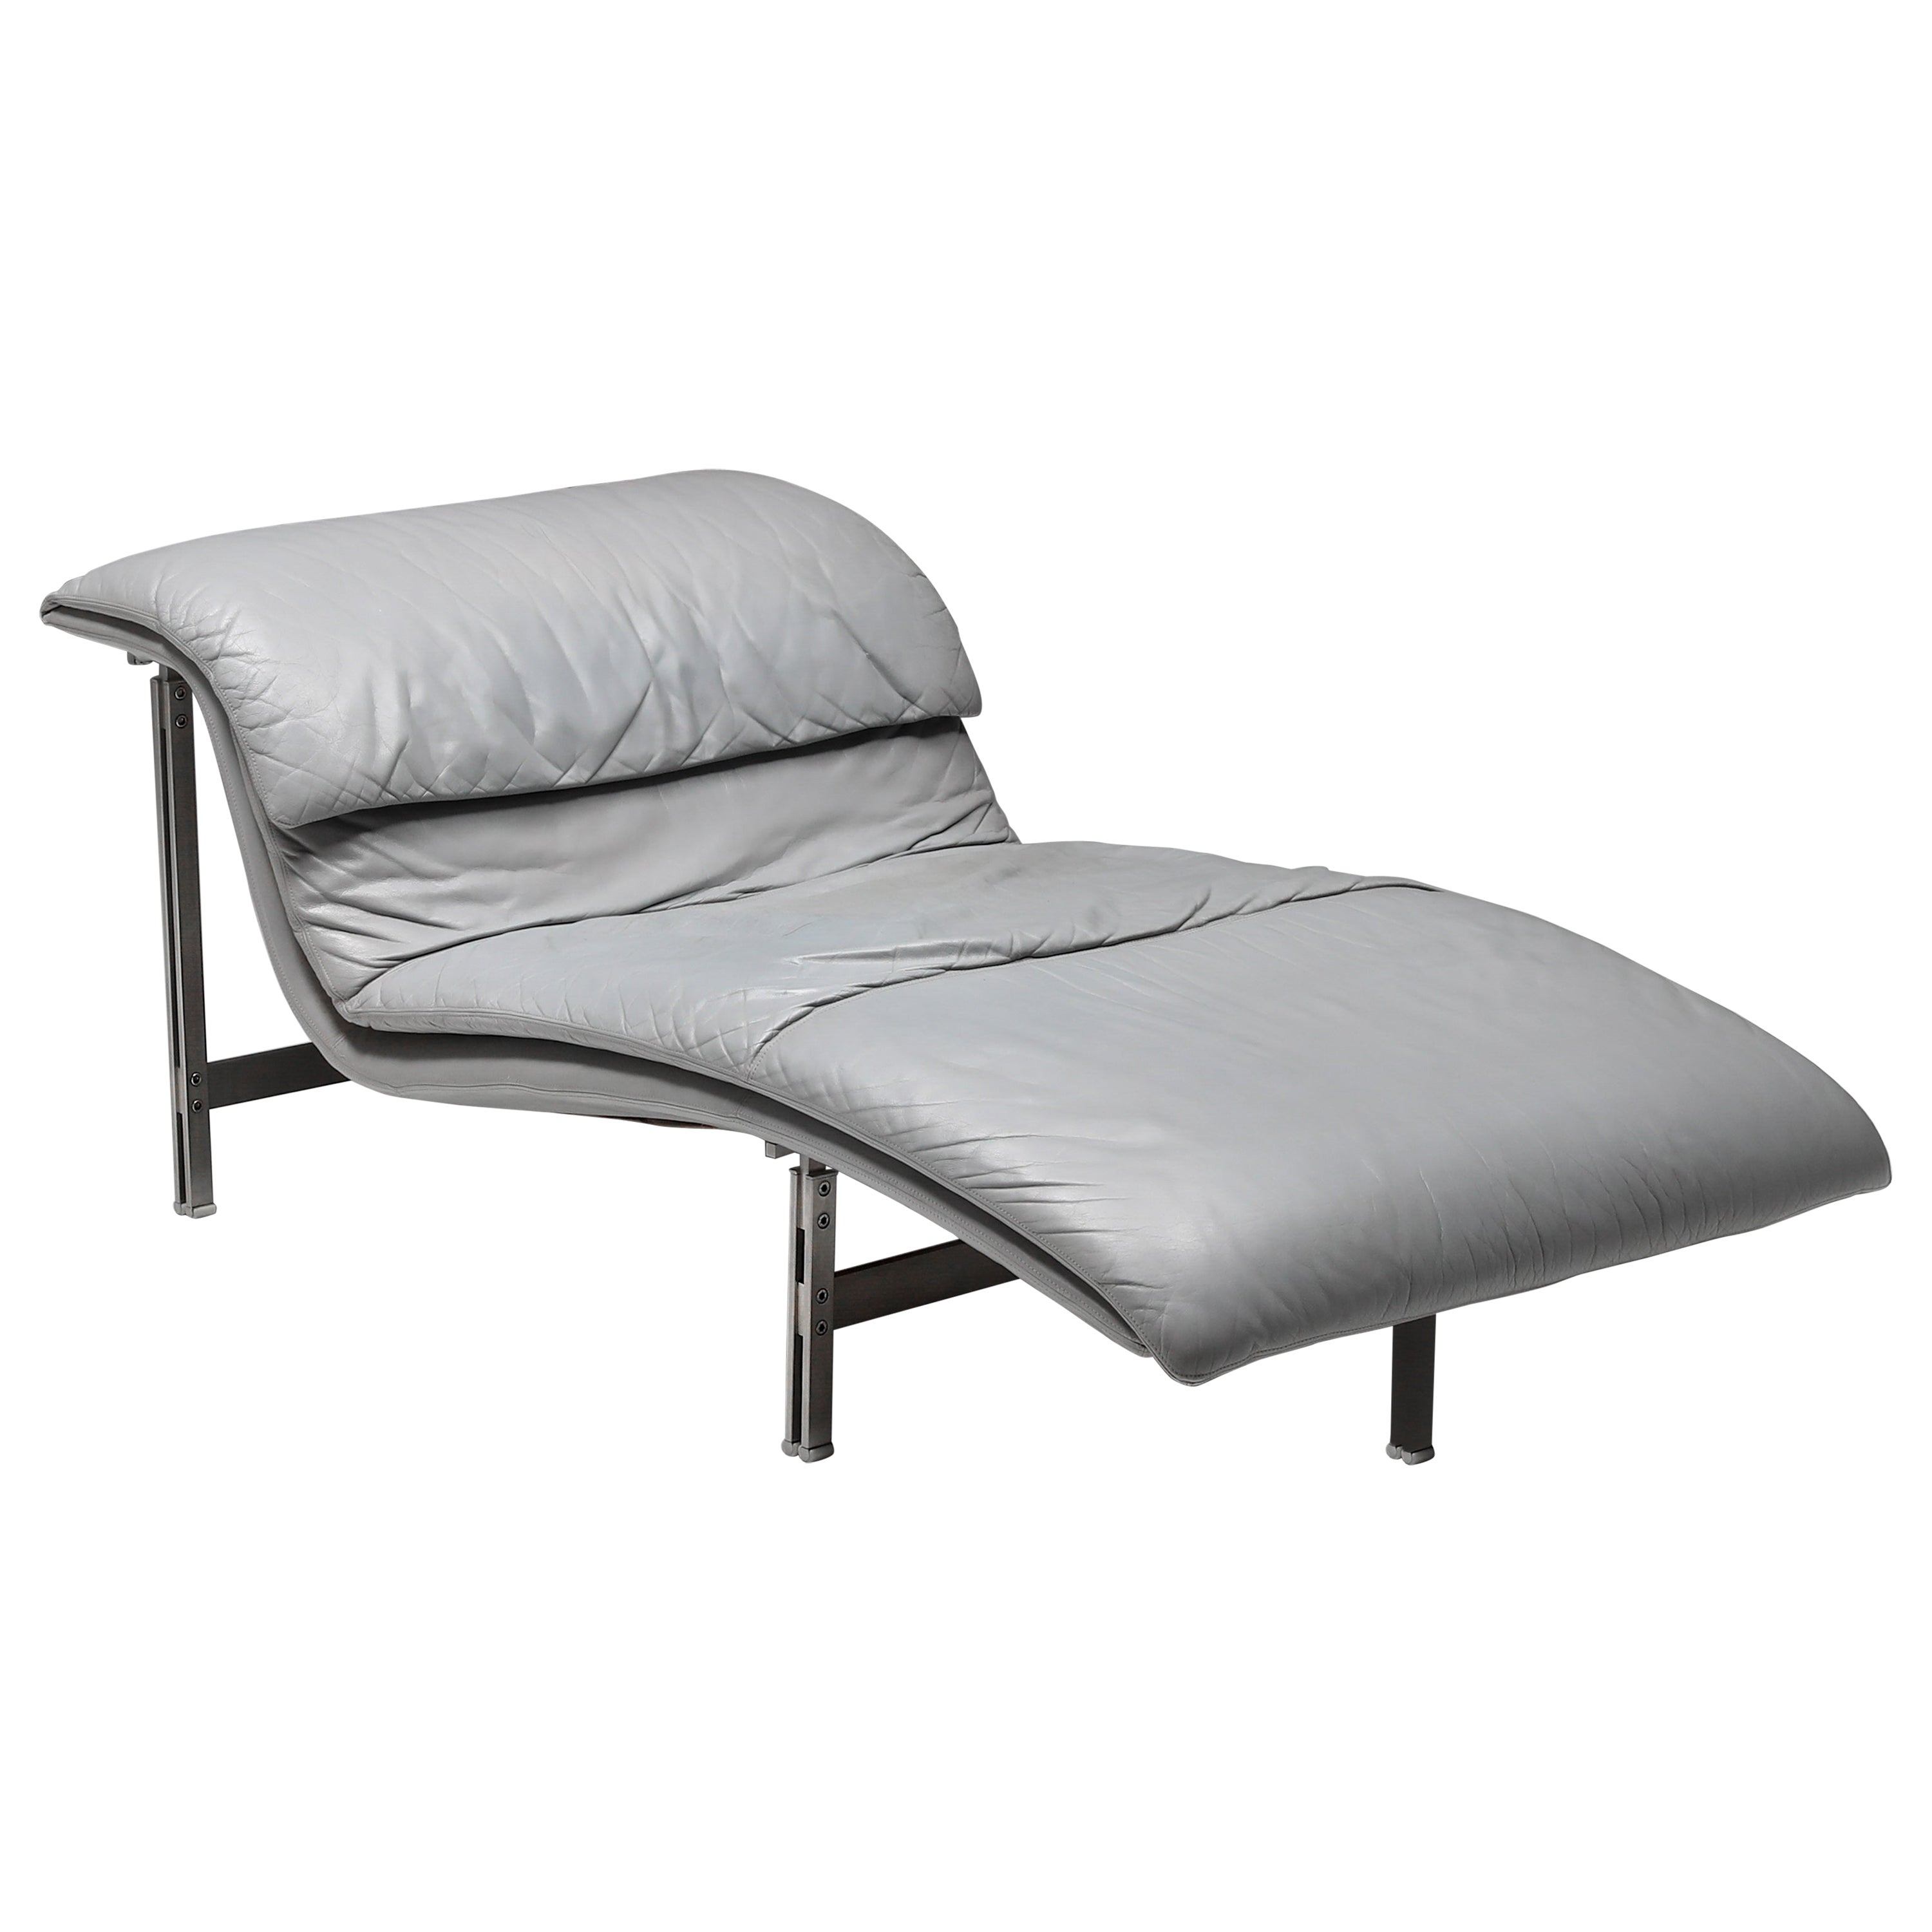 Post-Modern Saporiti Lounge Chair in Grey Leather by Giovanni Offredi, 1974 For Sale